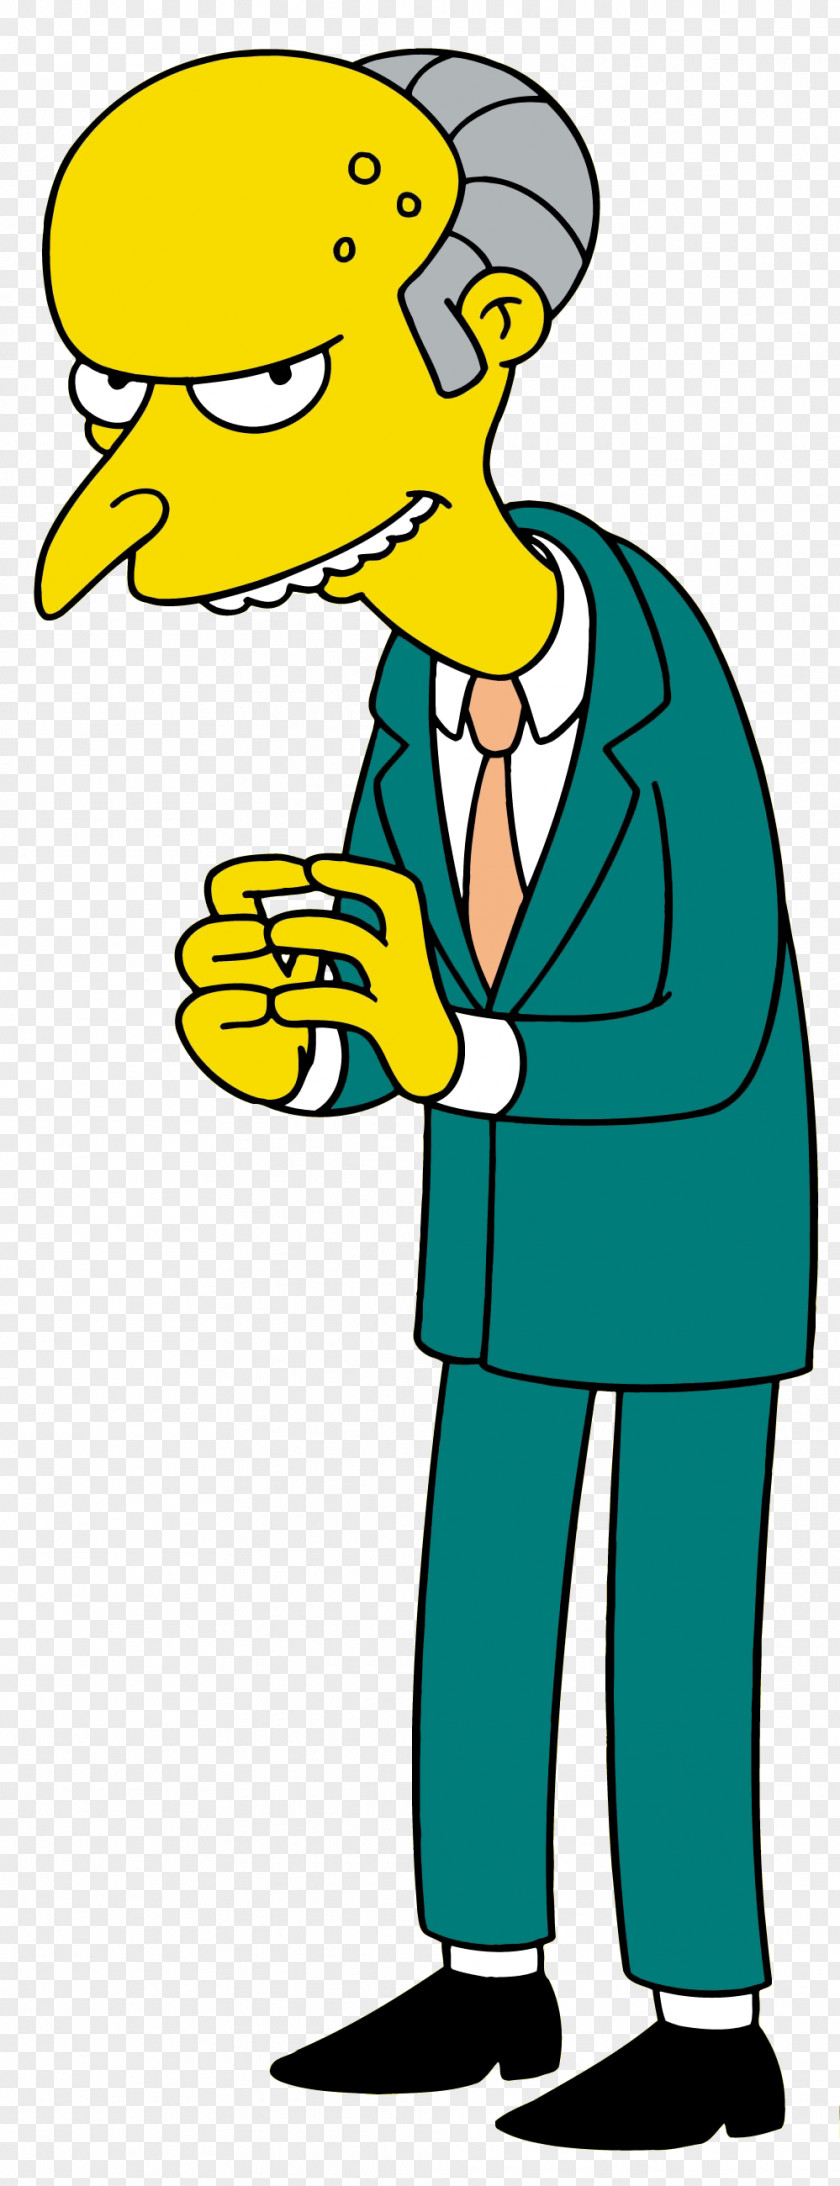 Simsons Supreme Mr. Burns, A Post-Electric Play Ned Flanders The Simpsons: Tapped Out Homer Simpson PNG